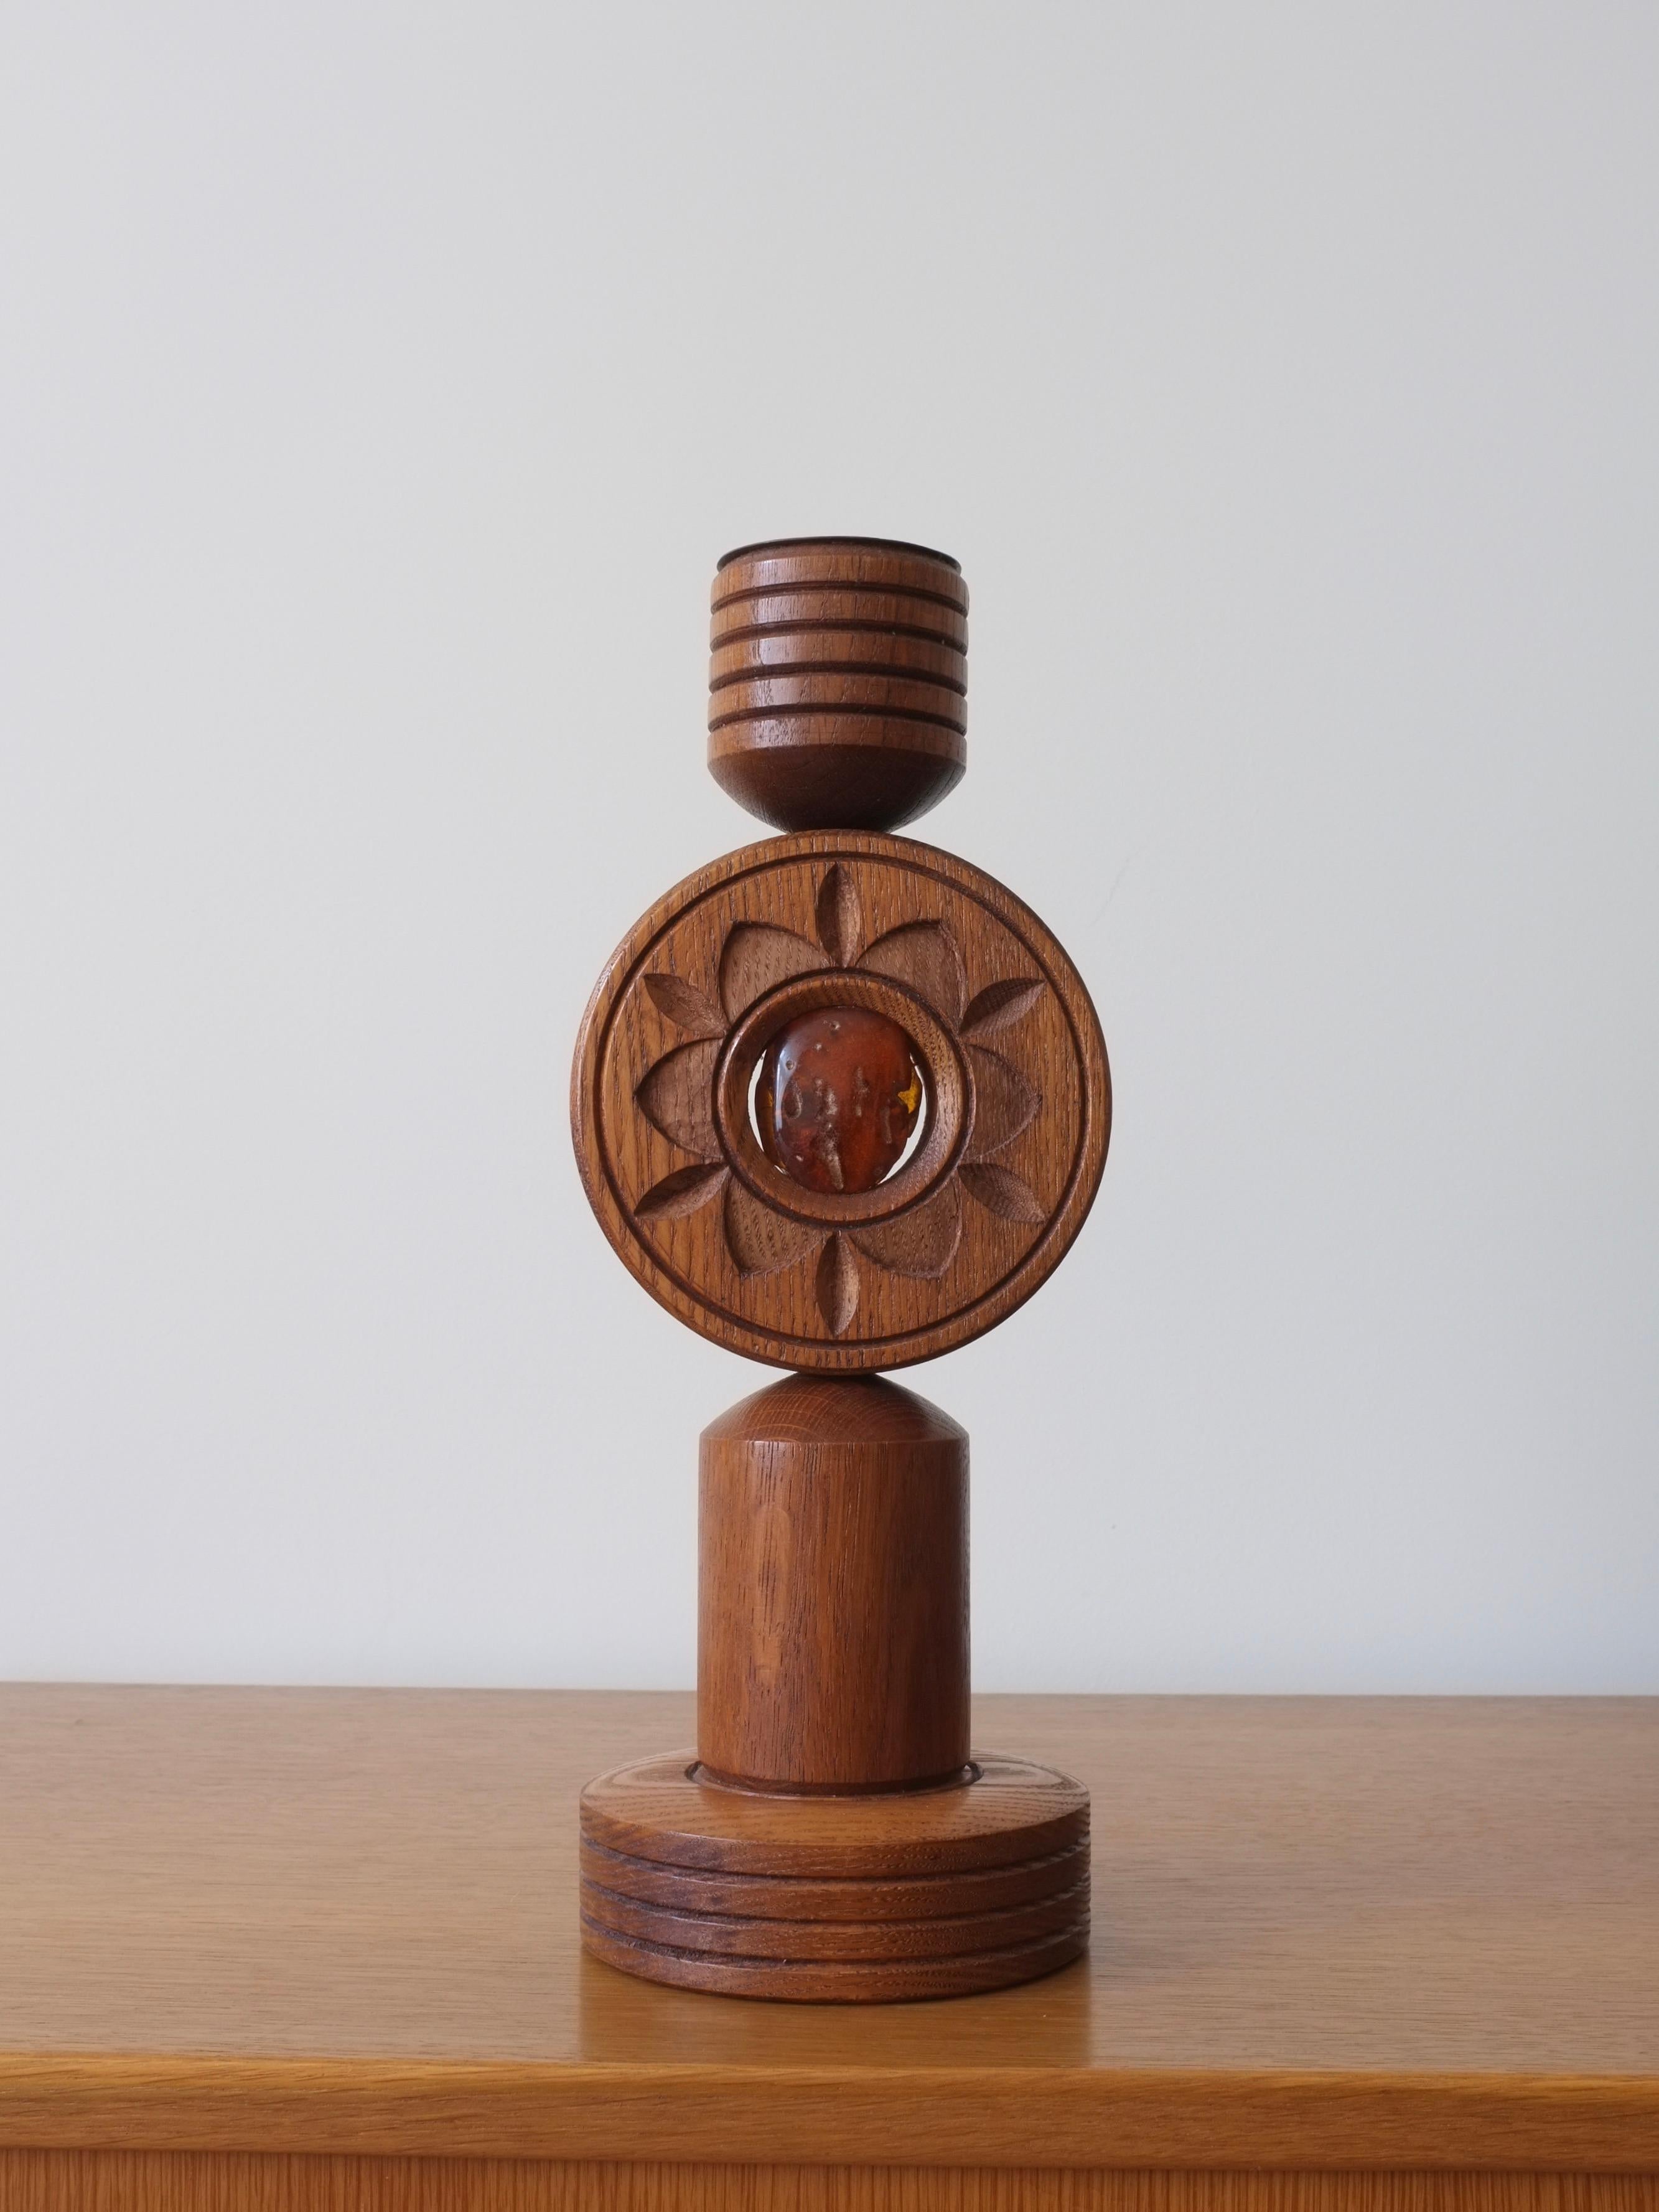 Vintage large brutalist carved oak wood candle holder with amber decoration (2 pieces).

Additional information:
Country of manufacture: Latvia
Design/Manufacture period: 1970s
Dimensions: 11.5 W x 10.5 D x 30 H cm
Condition: Good vintage condition